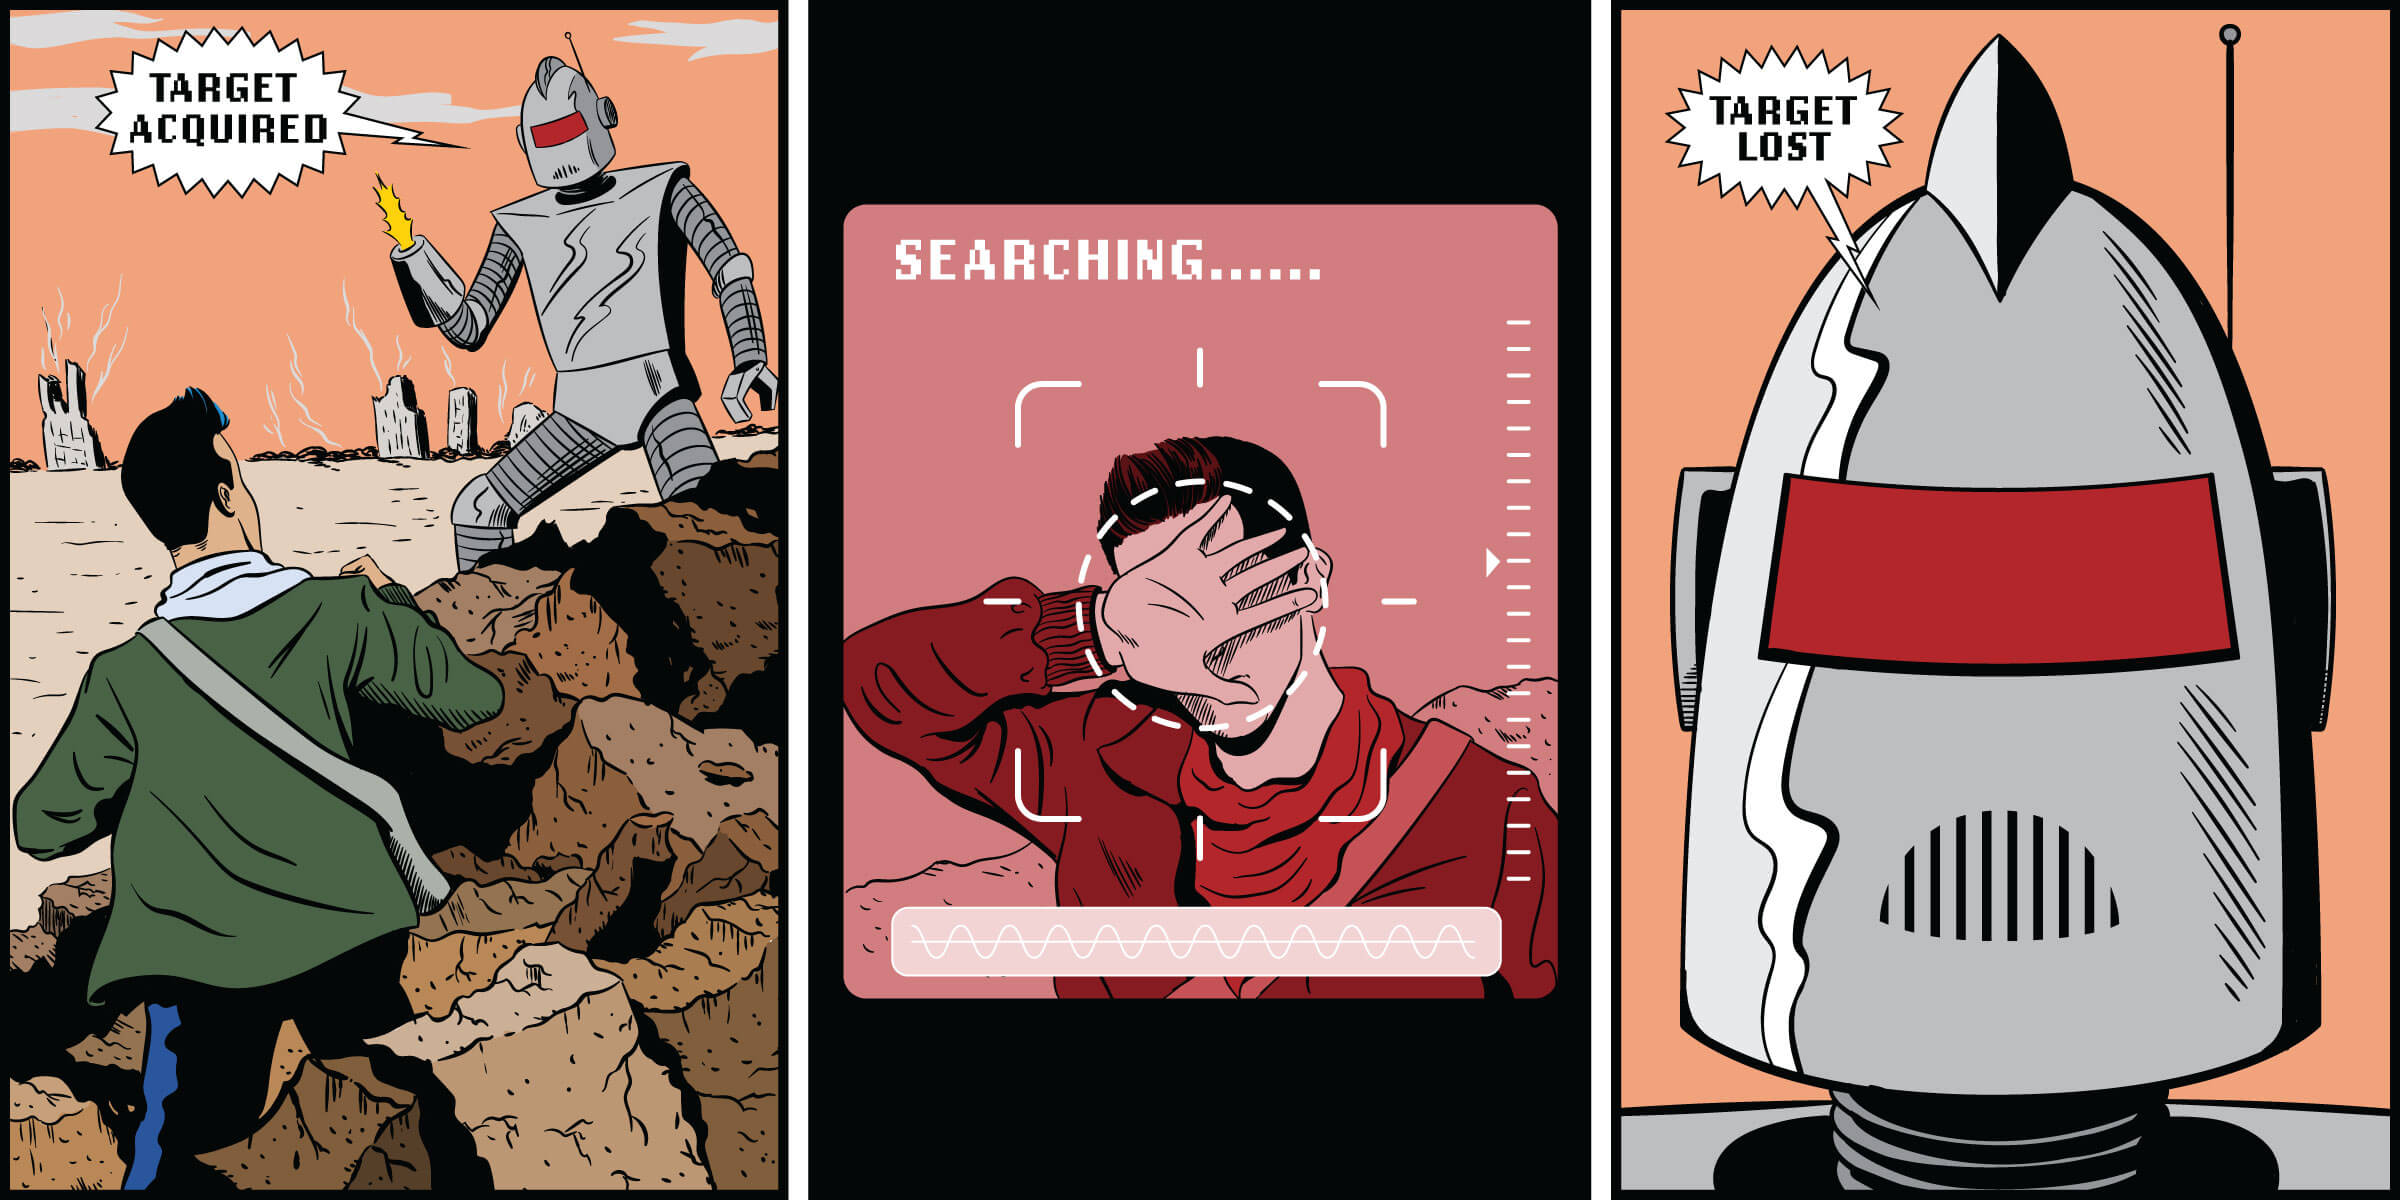 A pop comic illustration of a robot losing a human's facial recognition when the human places their hand in front of their face.